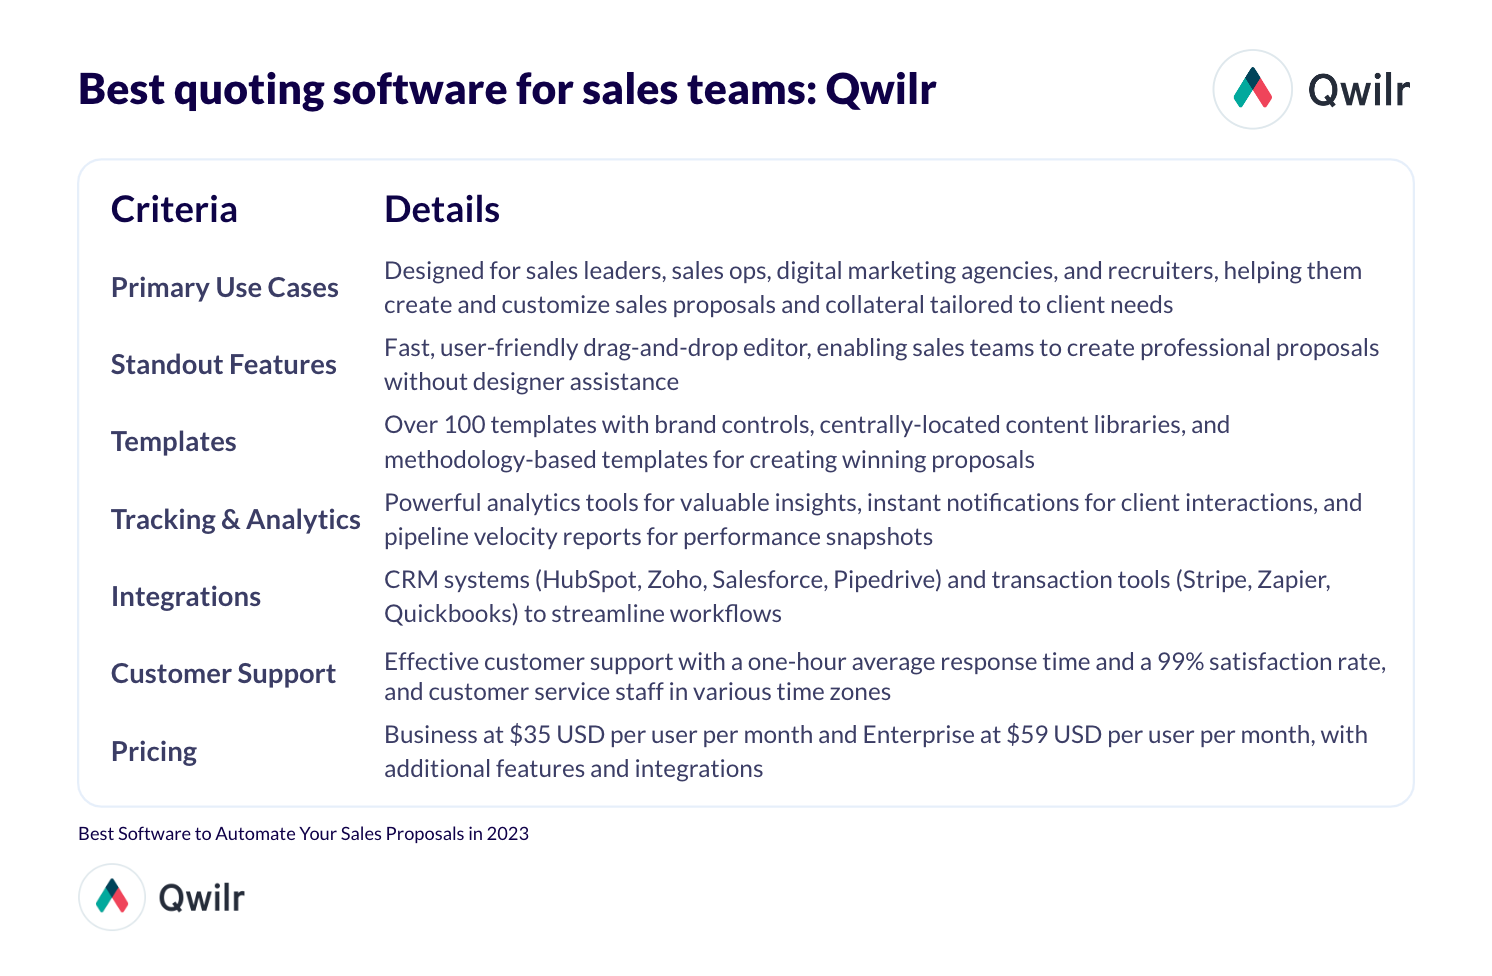 Table summary of Best for sales teams: Qwilr